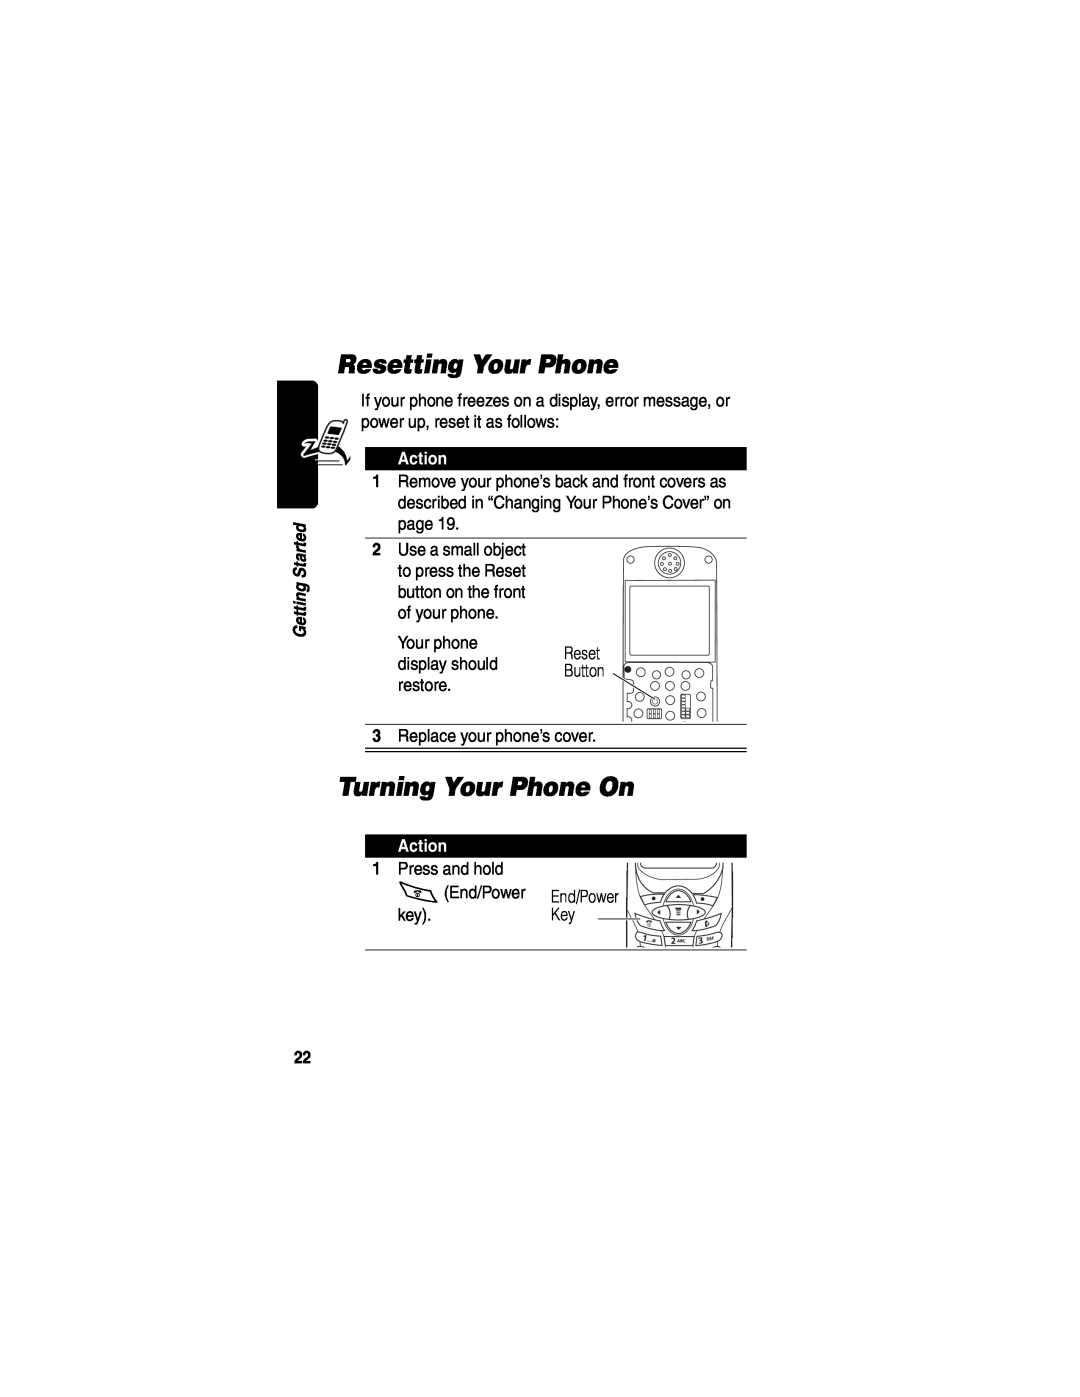 Motorola WIRELESS TELEPHONE manual Resetting Your Phone, Turning Your Phone On, Action 